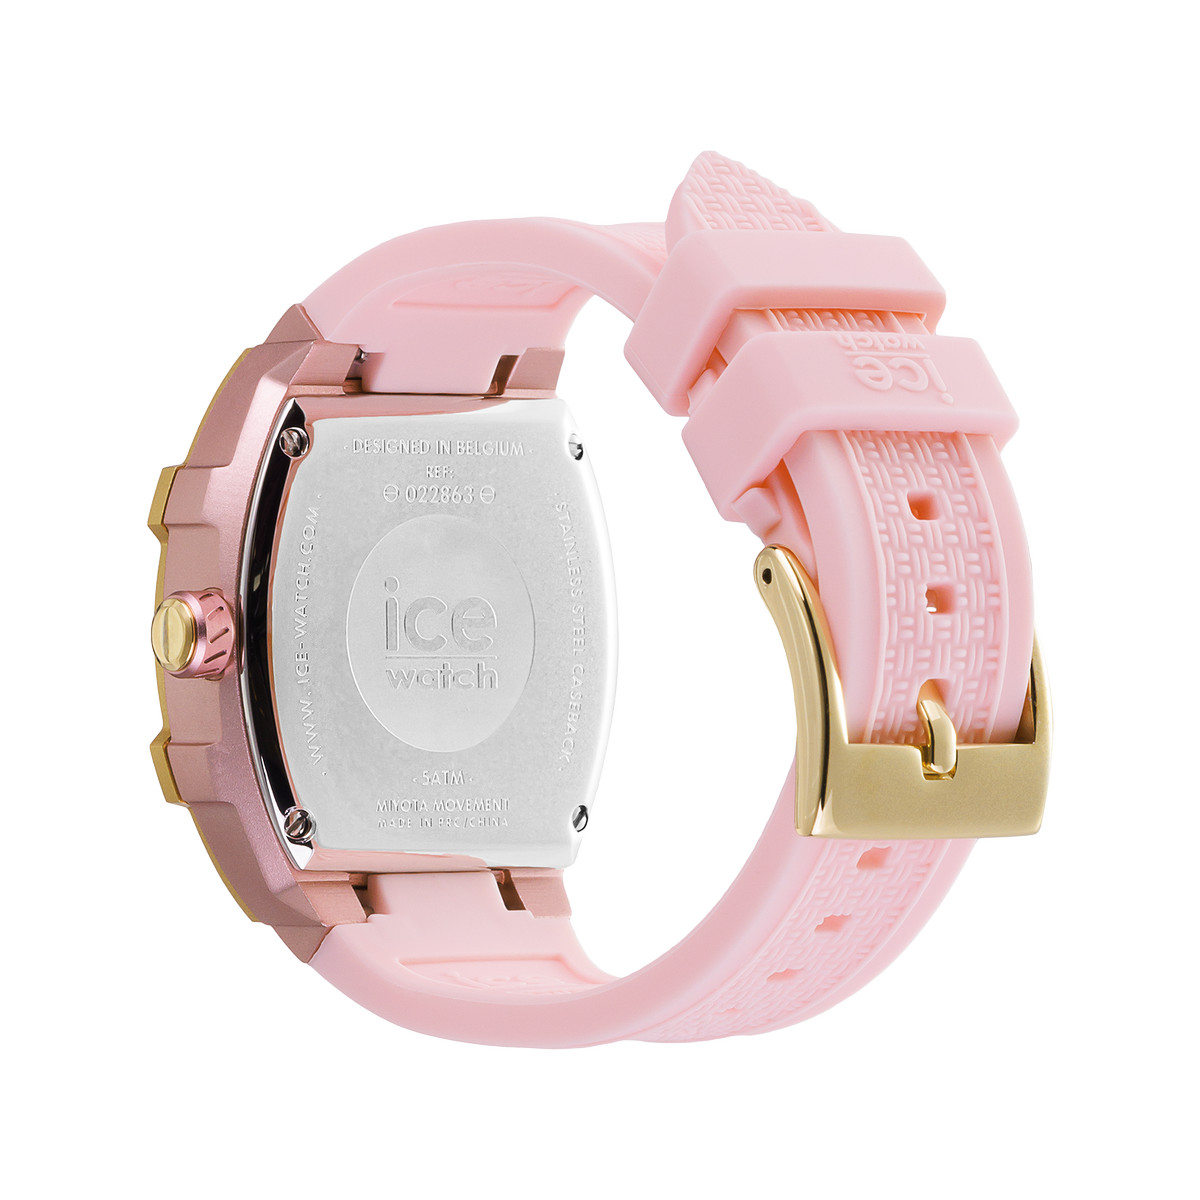 Montre ICE WATCH Ice boliday femme bracelet silicone rose - vue 3